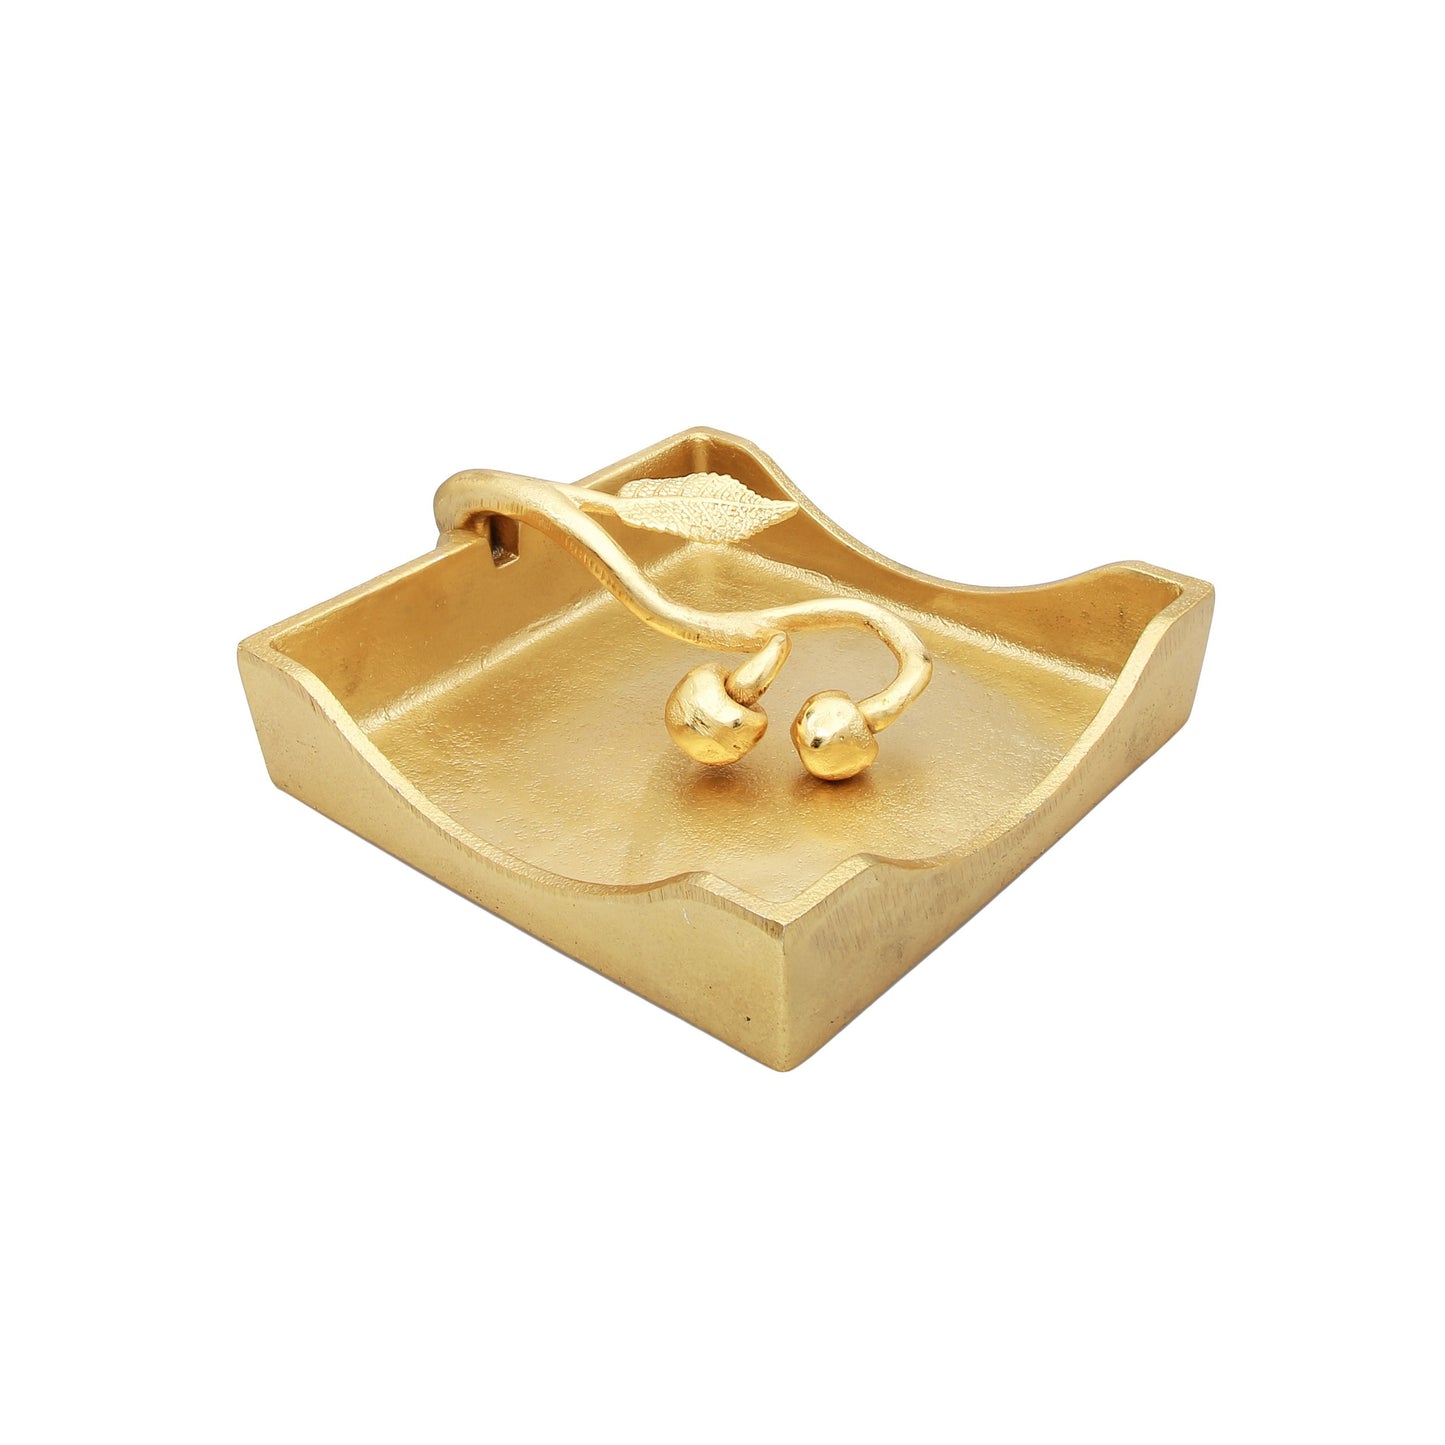 Classic Touch Gold Square Napkin Holder With Leaf Shaped Toungue, 3" x 7" x 13"